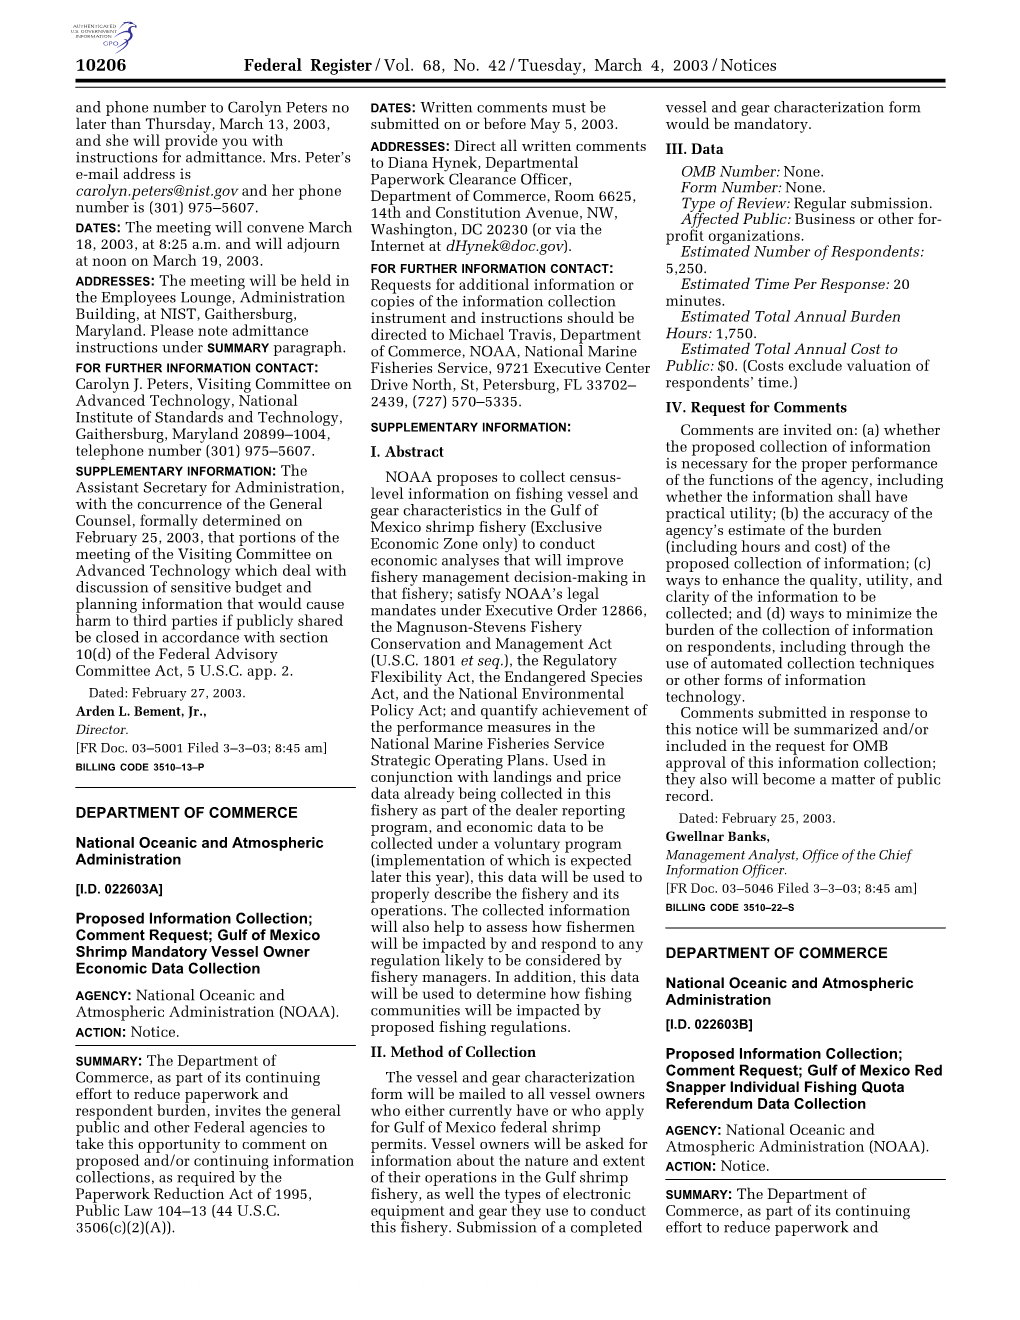 Federal Register/Vol. 68, No. 42/Tuesday, March 4, 2003/Notices